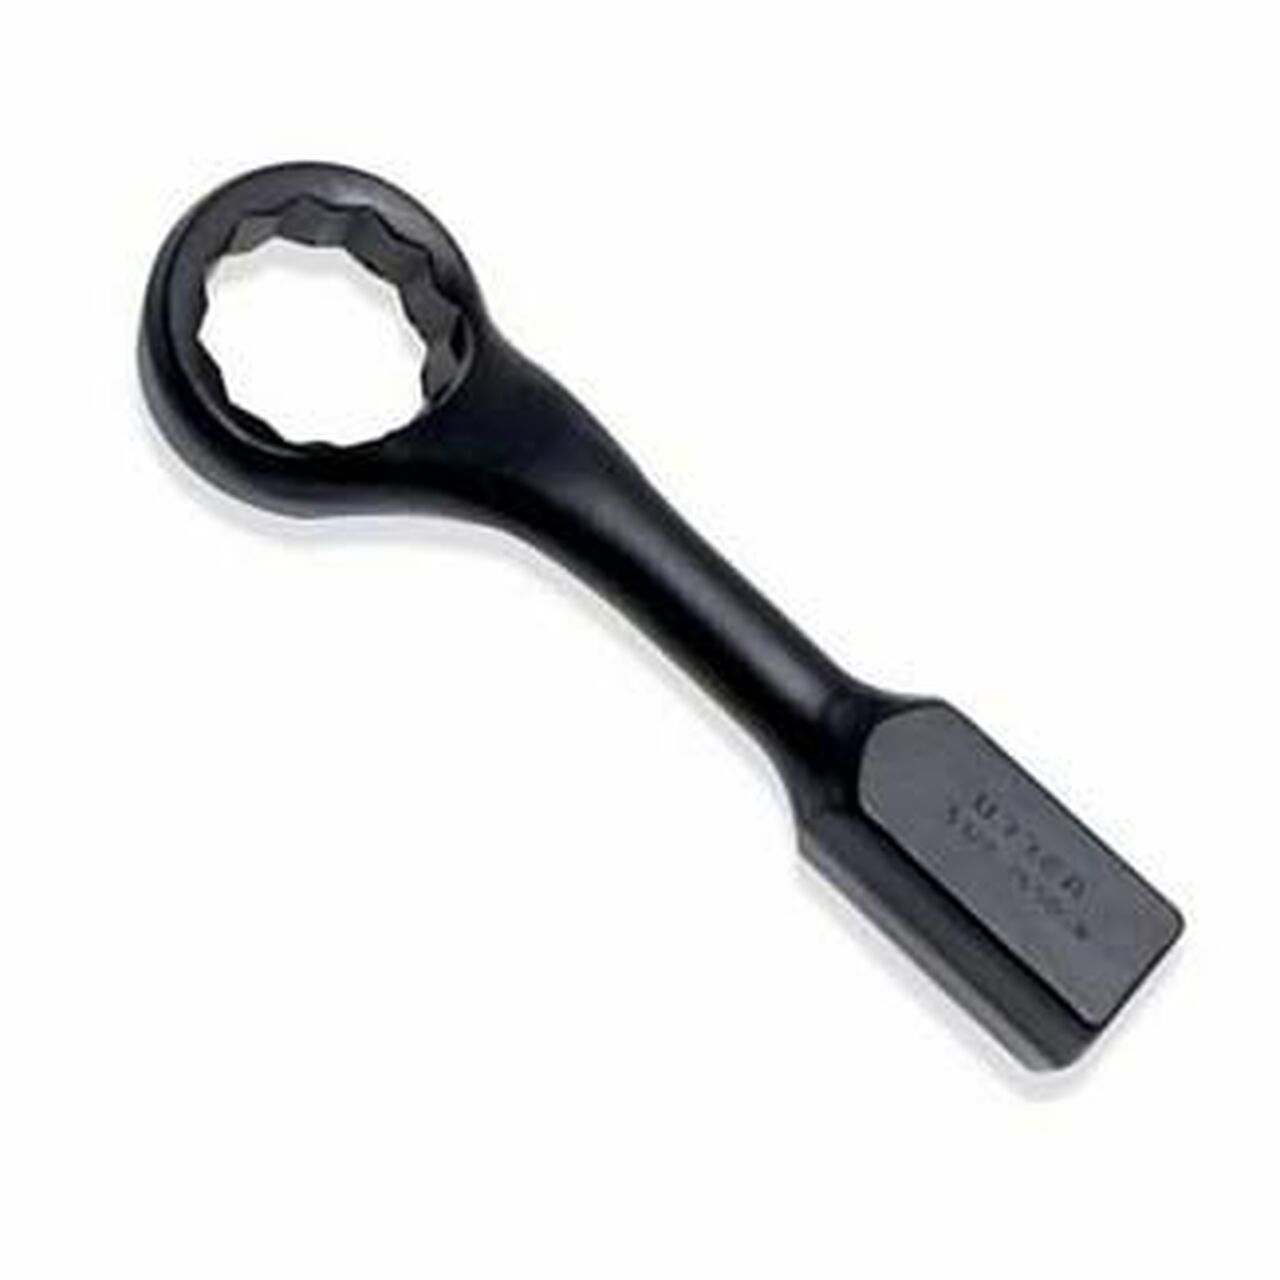 1-1/4 IN 12-PT OFFSET STRIKING
WRENCH